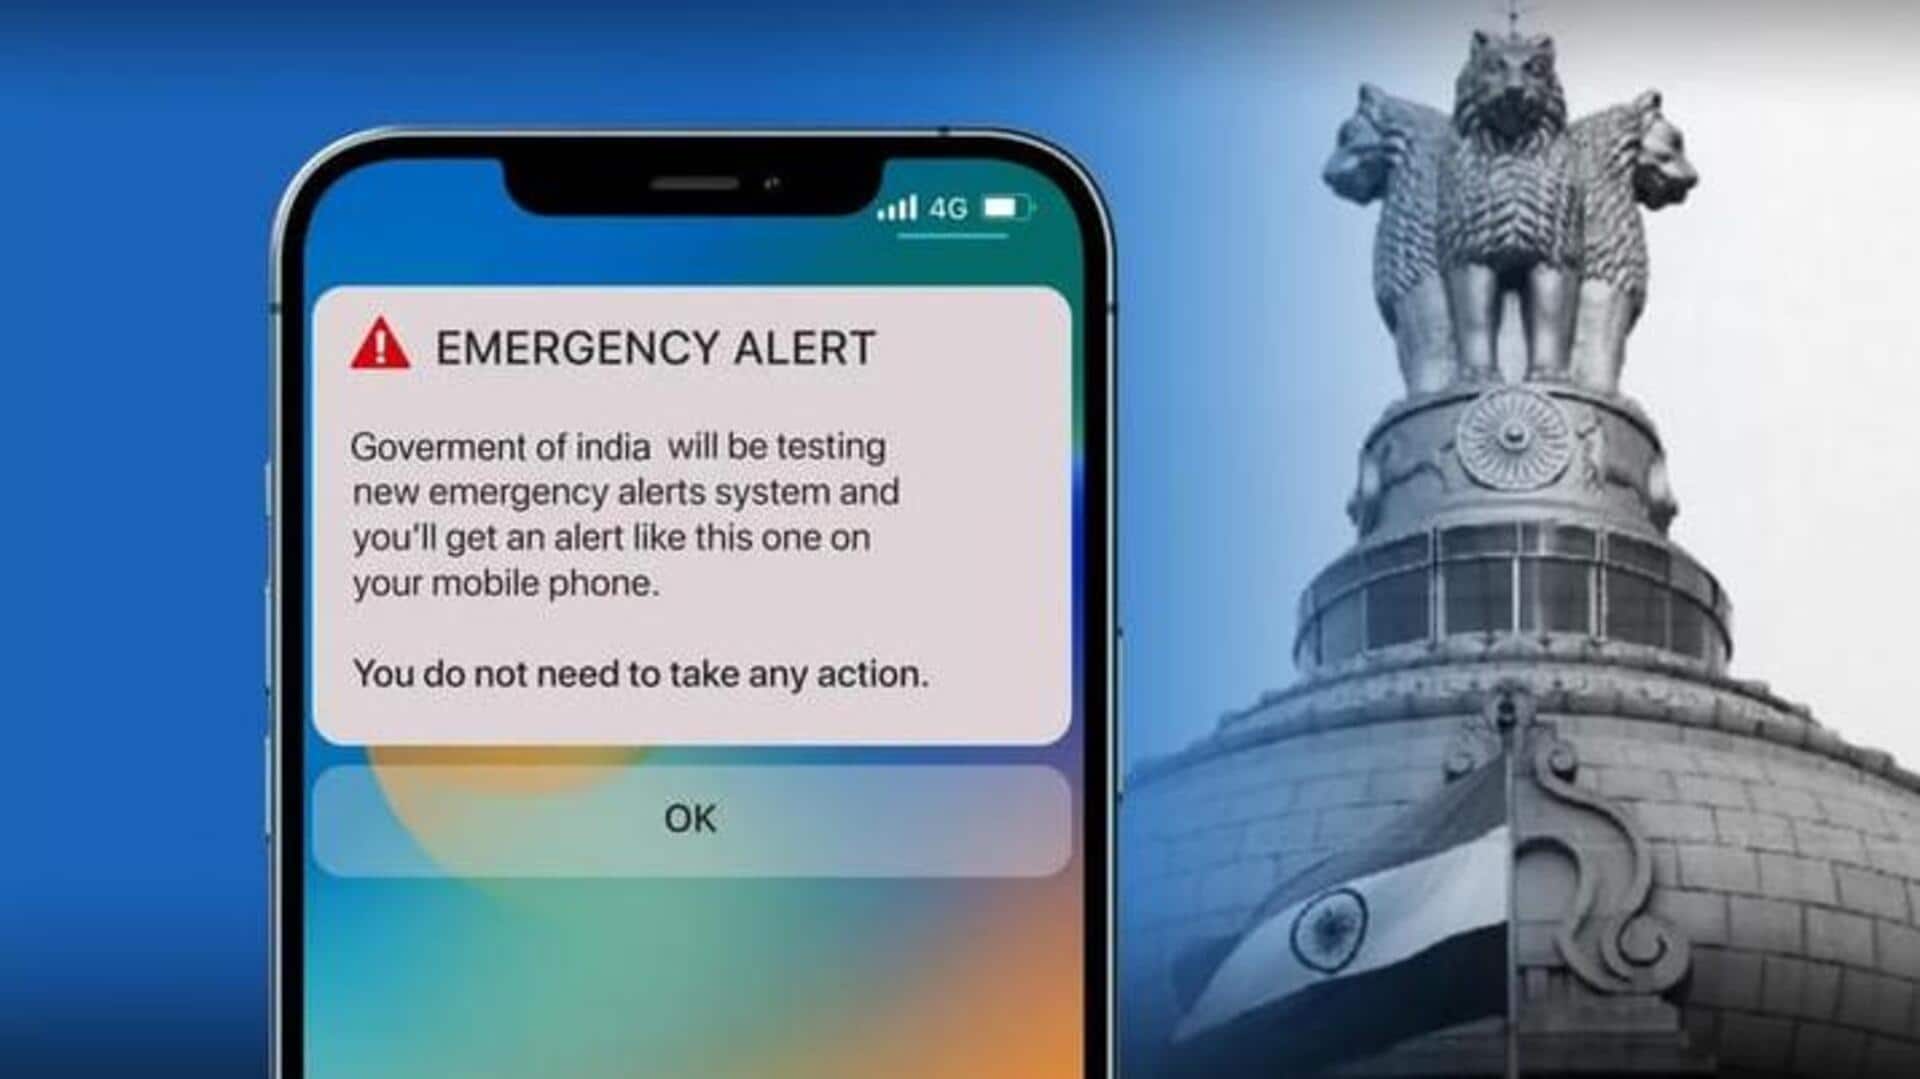 iPhone and Android users in India receive emergency test alerts